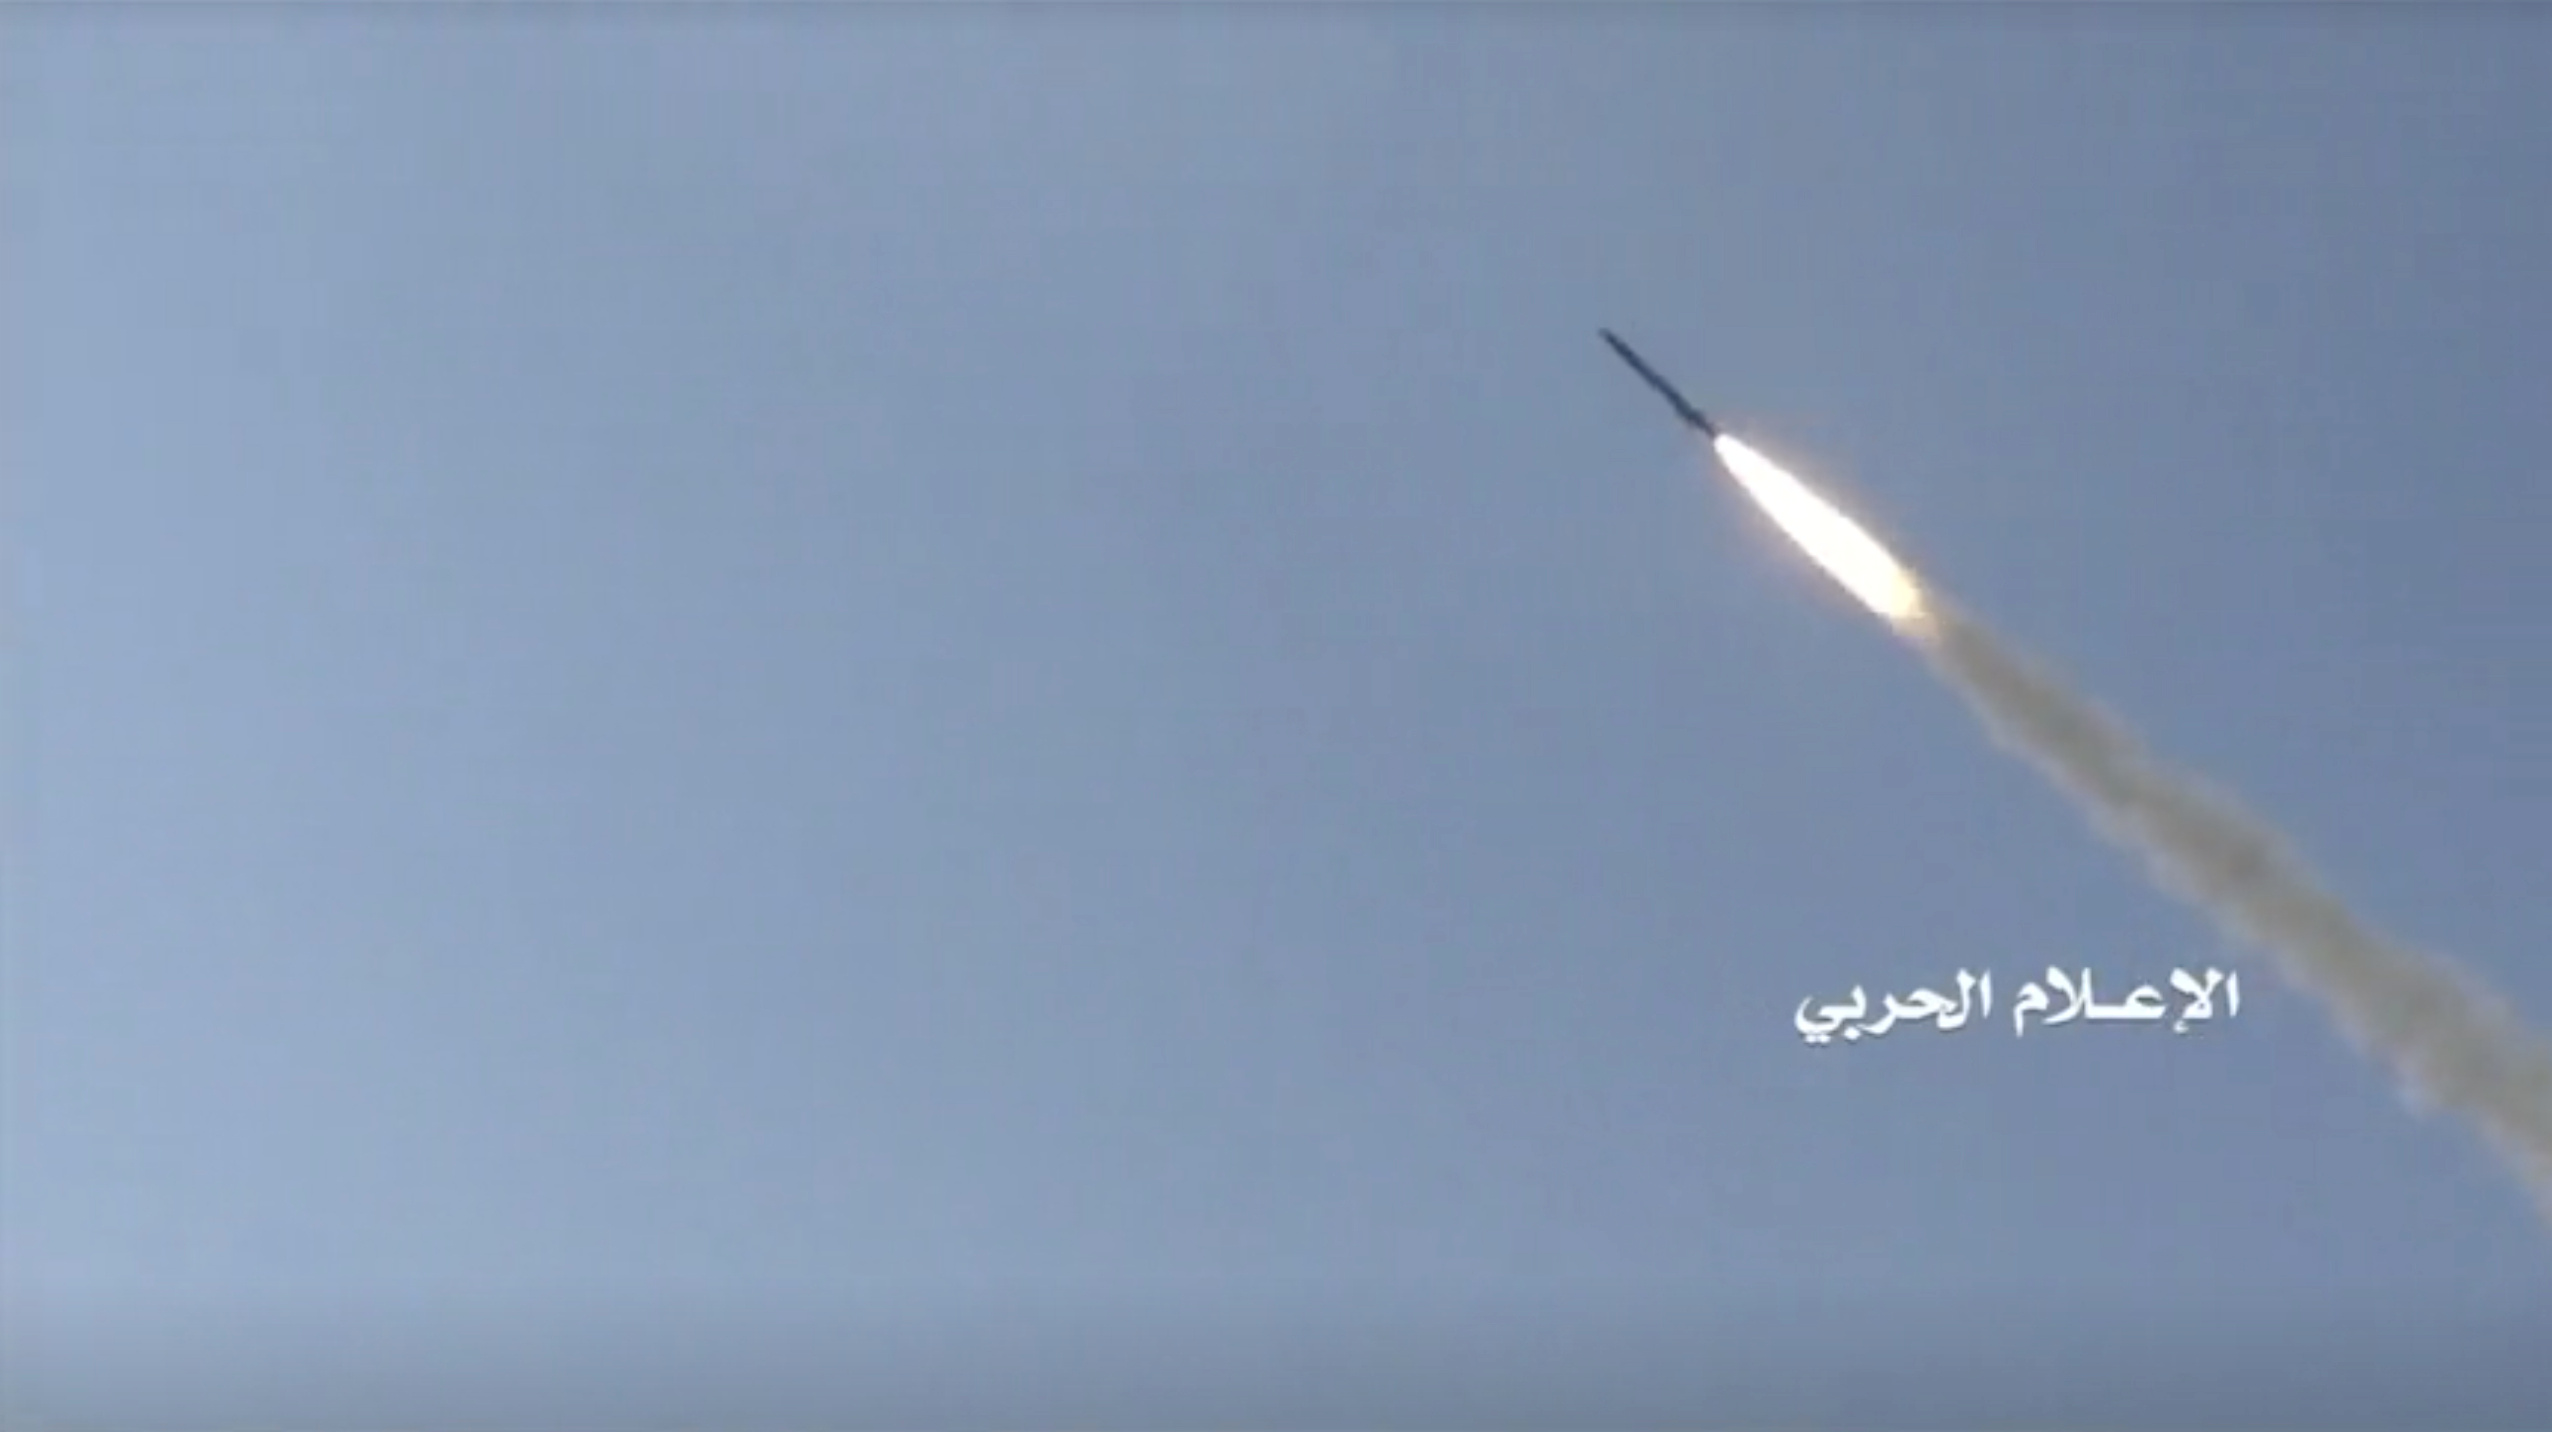 A cruise missile called 'Quds' is seen after it was launched from an unidentified location in Yemen